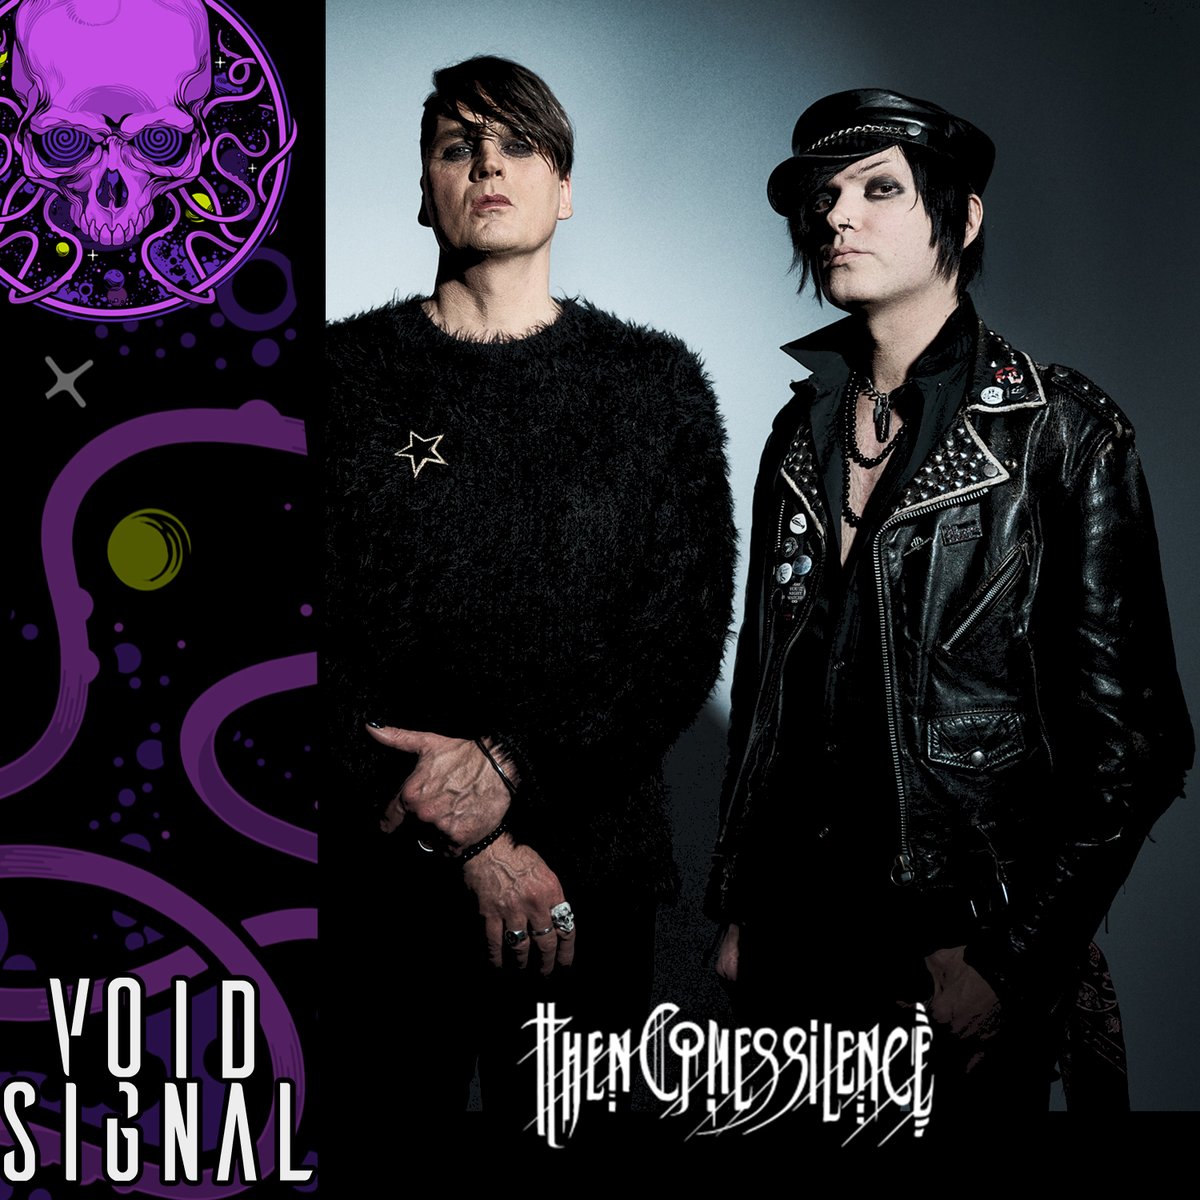 Uh oh, it's more Void Signal with @ThenComesS. Catch them live at @darkforcefest in just three weeks! Have a good weekend, more Void Signal soon. 💜

#voidsignal #thencomessilence #darkforcefest

Episode here: tinyurl.com/thencomessilen… or anywhere podcasts hide.